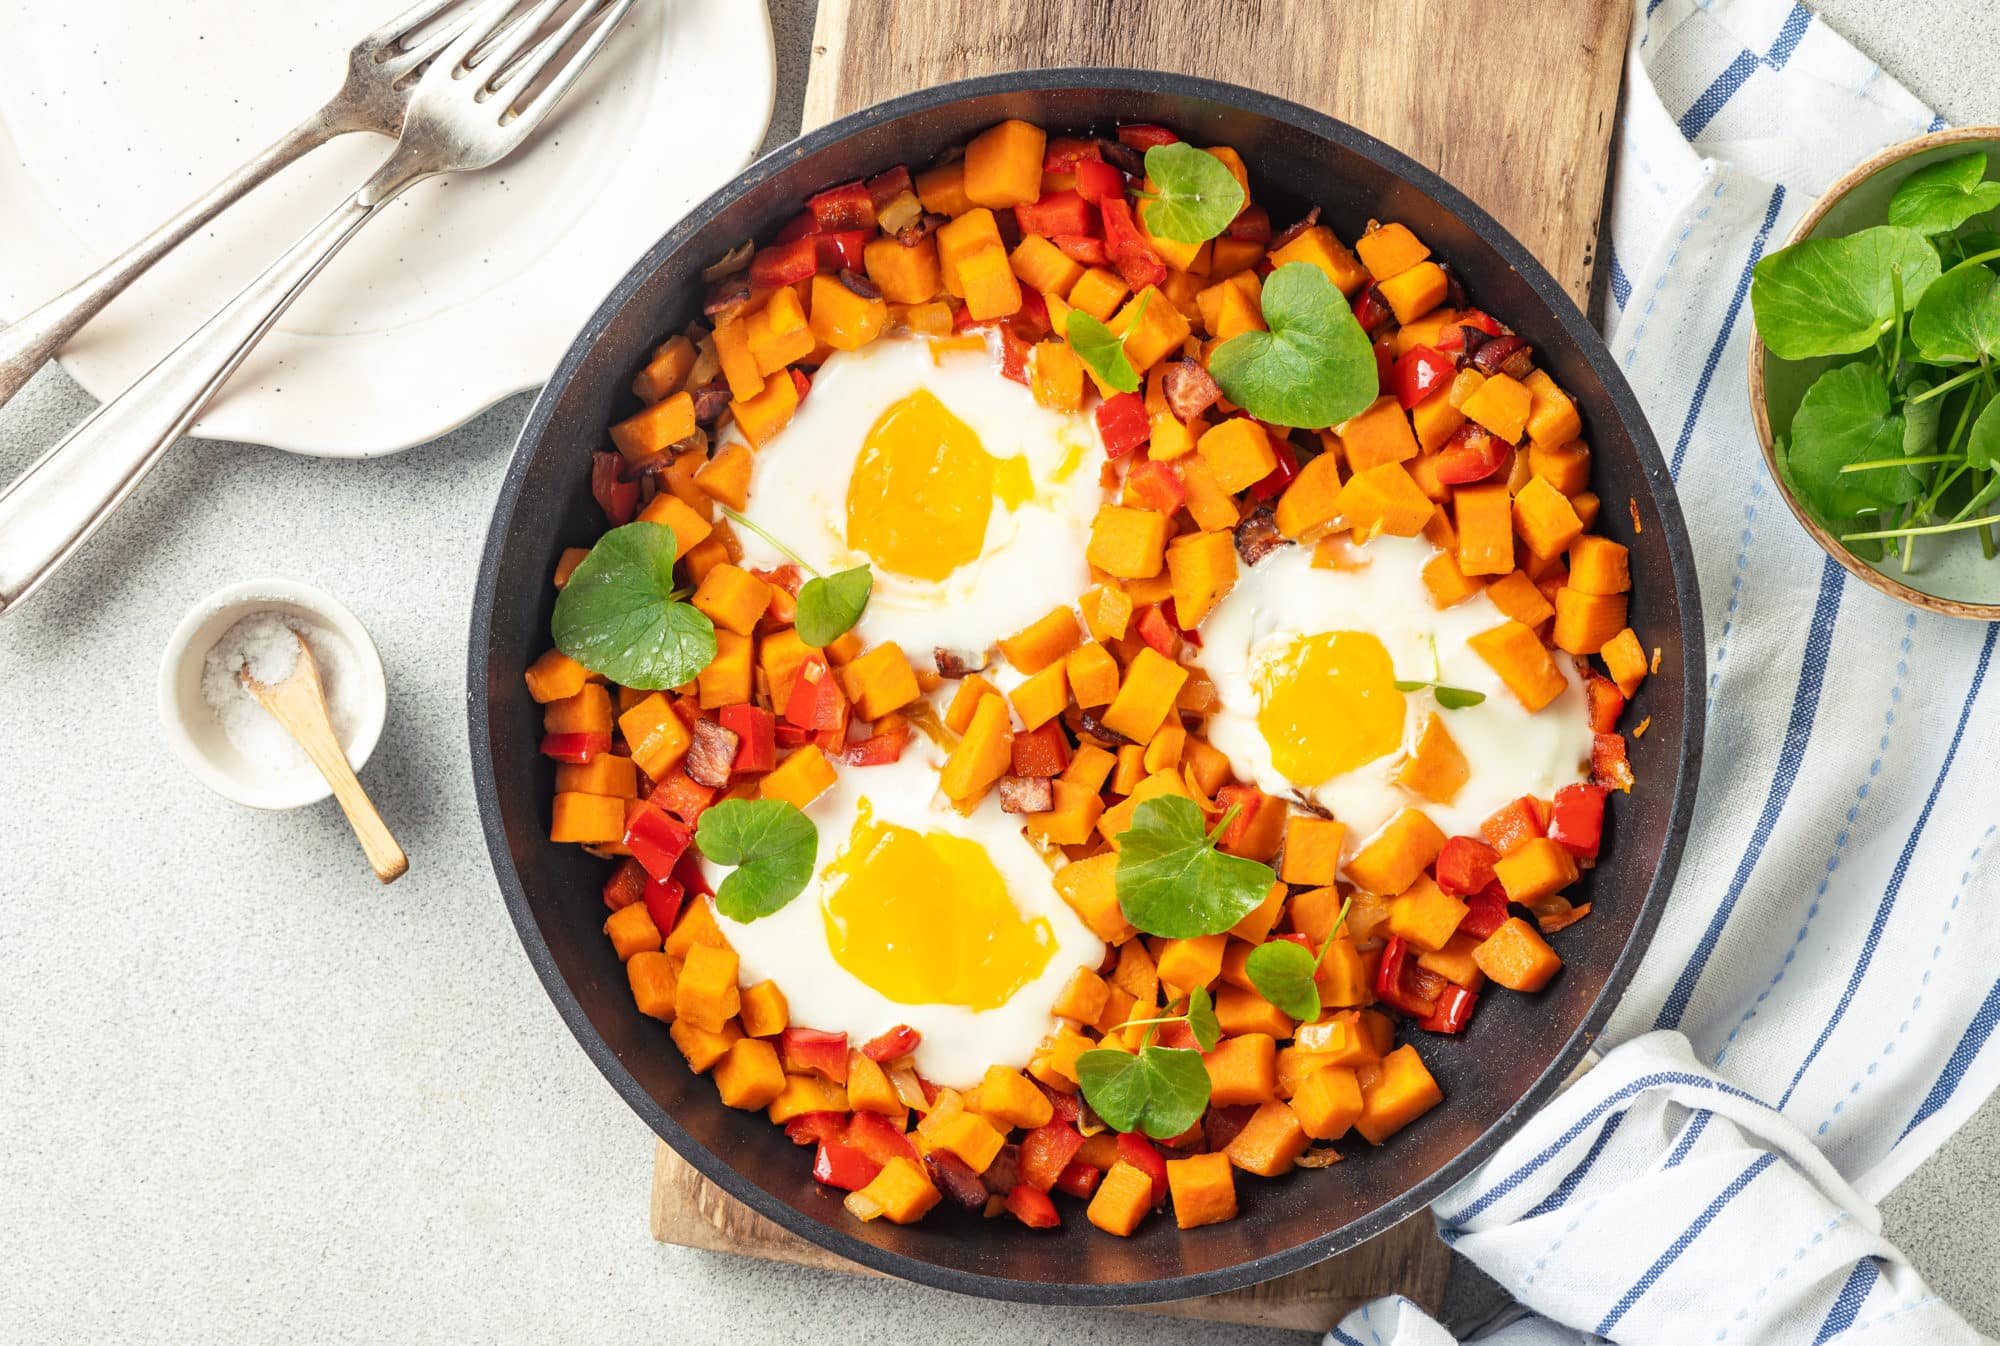 wooden-cutting-board-under-a-black-skillet-filled-with-red-pepper-sweet-potatoes-runny-eggs-and-watercress-and-silver-forks-on-a-white-plate-and-a-small-bowl-of-salt-with-a-small-wooden-spoon-and-blue-and-white-striped-towel-under-a-white-bowl-filled-with-watercress